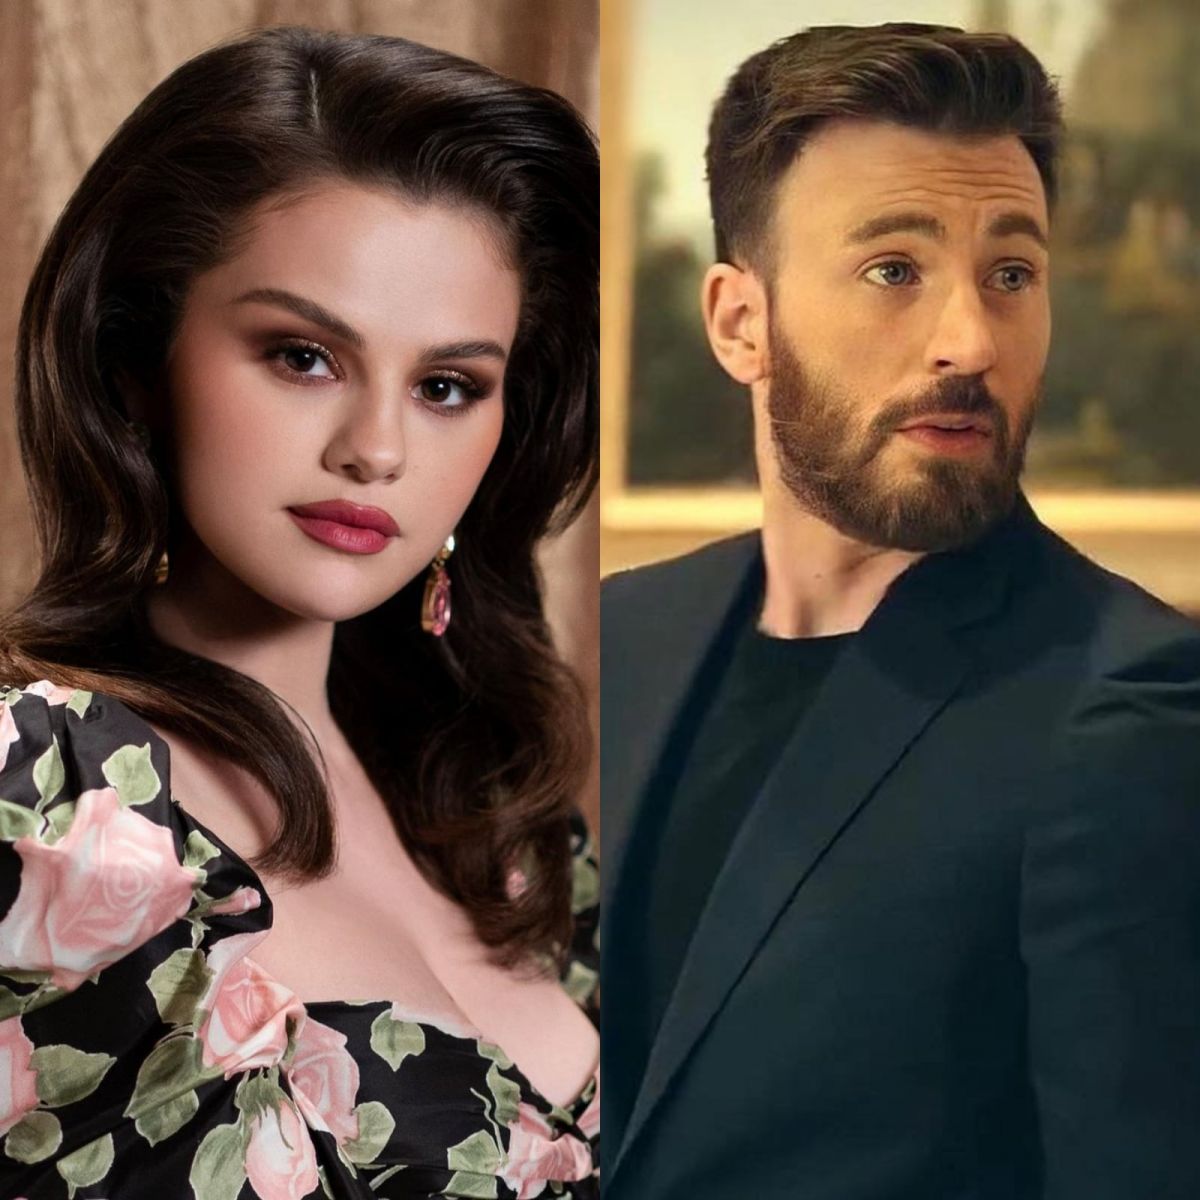 Selena Gomez's new dating rumours are fueled by Chris Evans' Instagram story; here's why